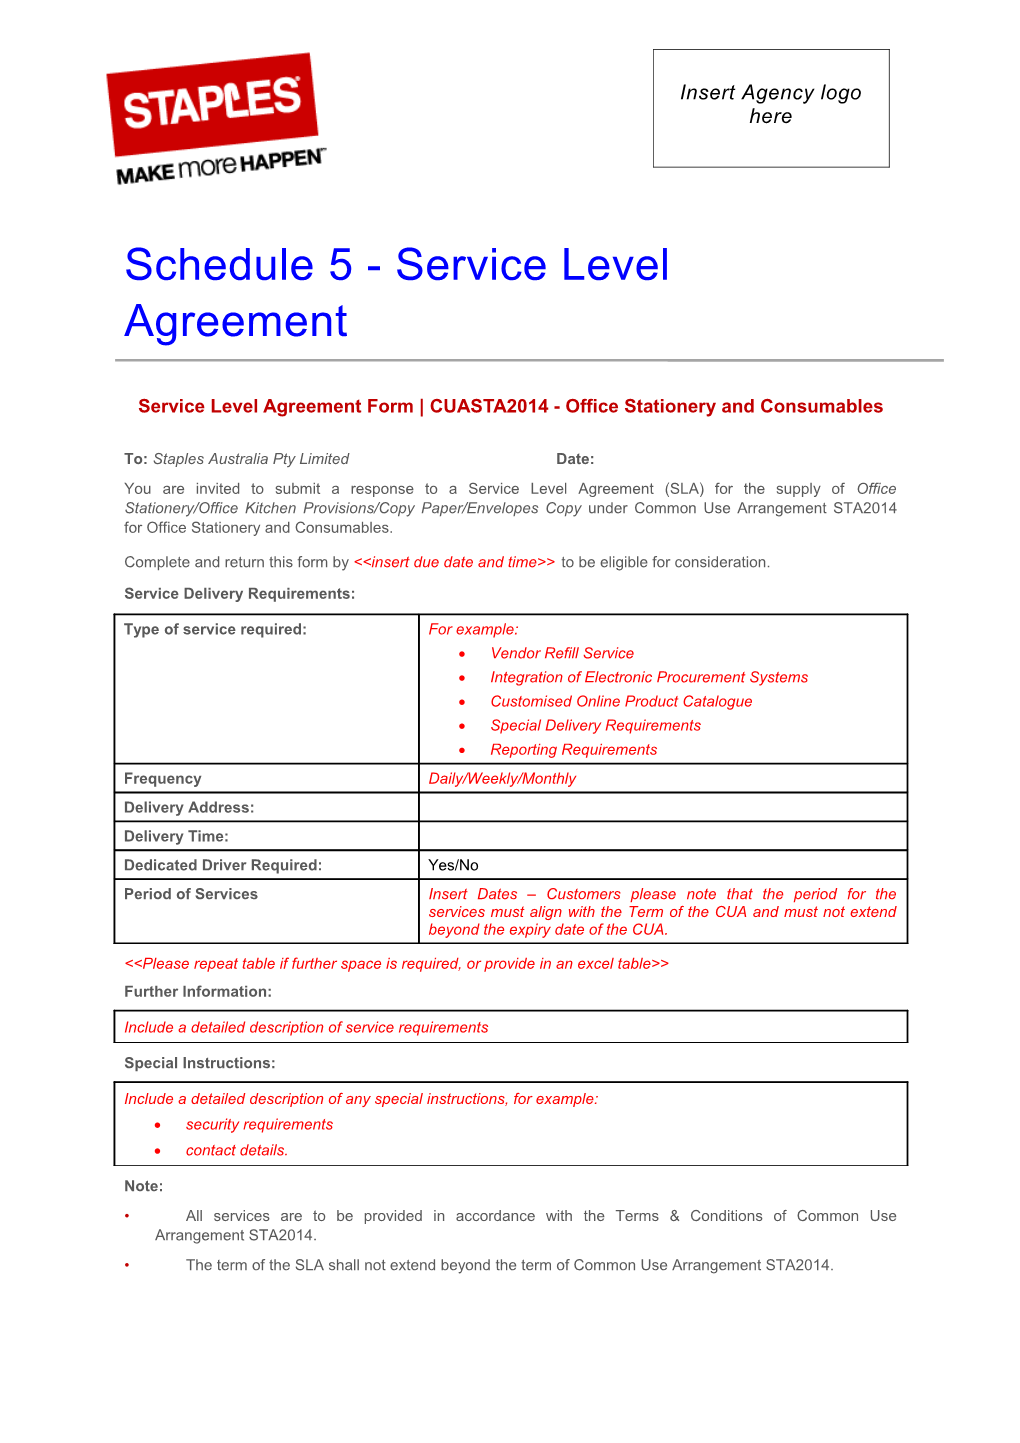 Service Level Agreement Form CUASTA2014 - Office Stationery and Consumables